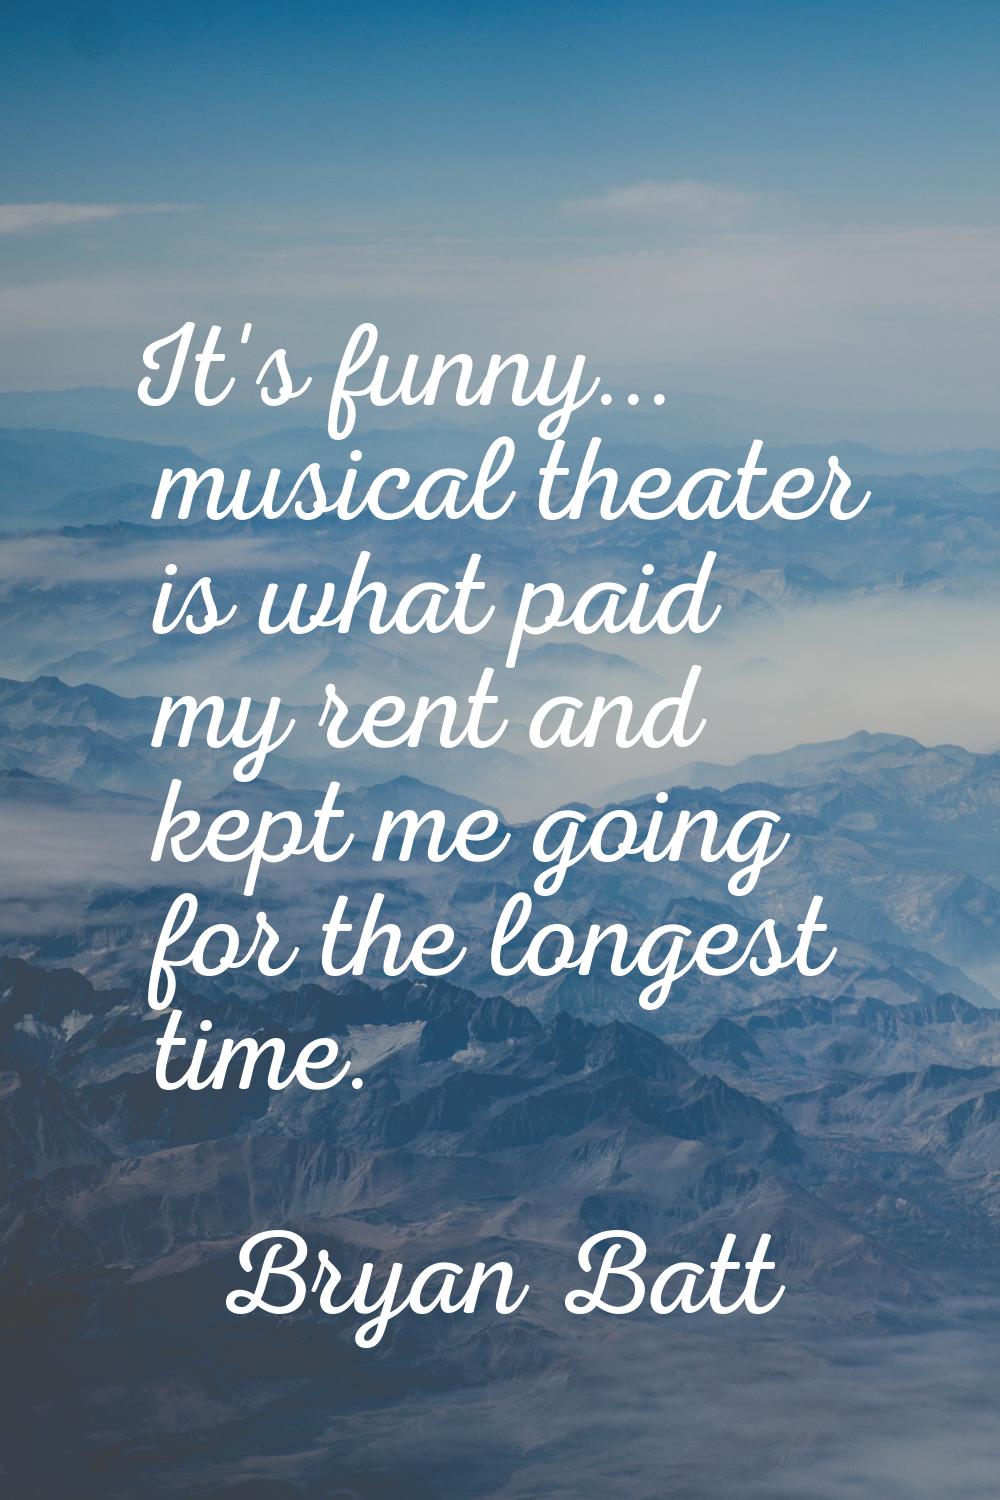 It's funny... musical theater is what paid my rent and kept me going for the longest time.